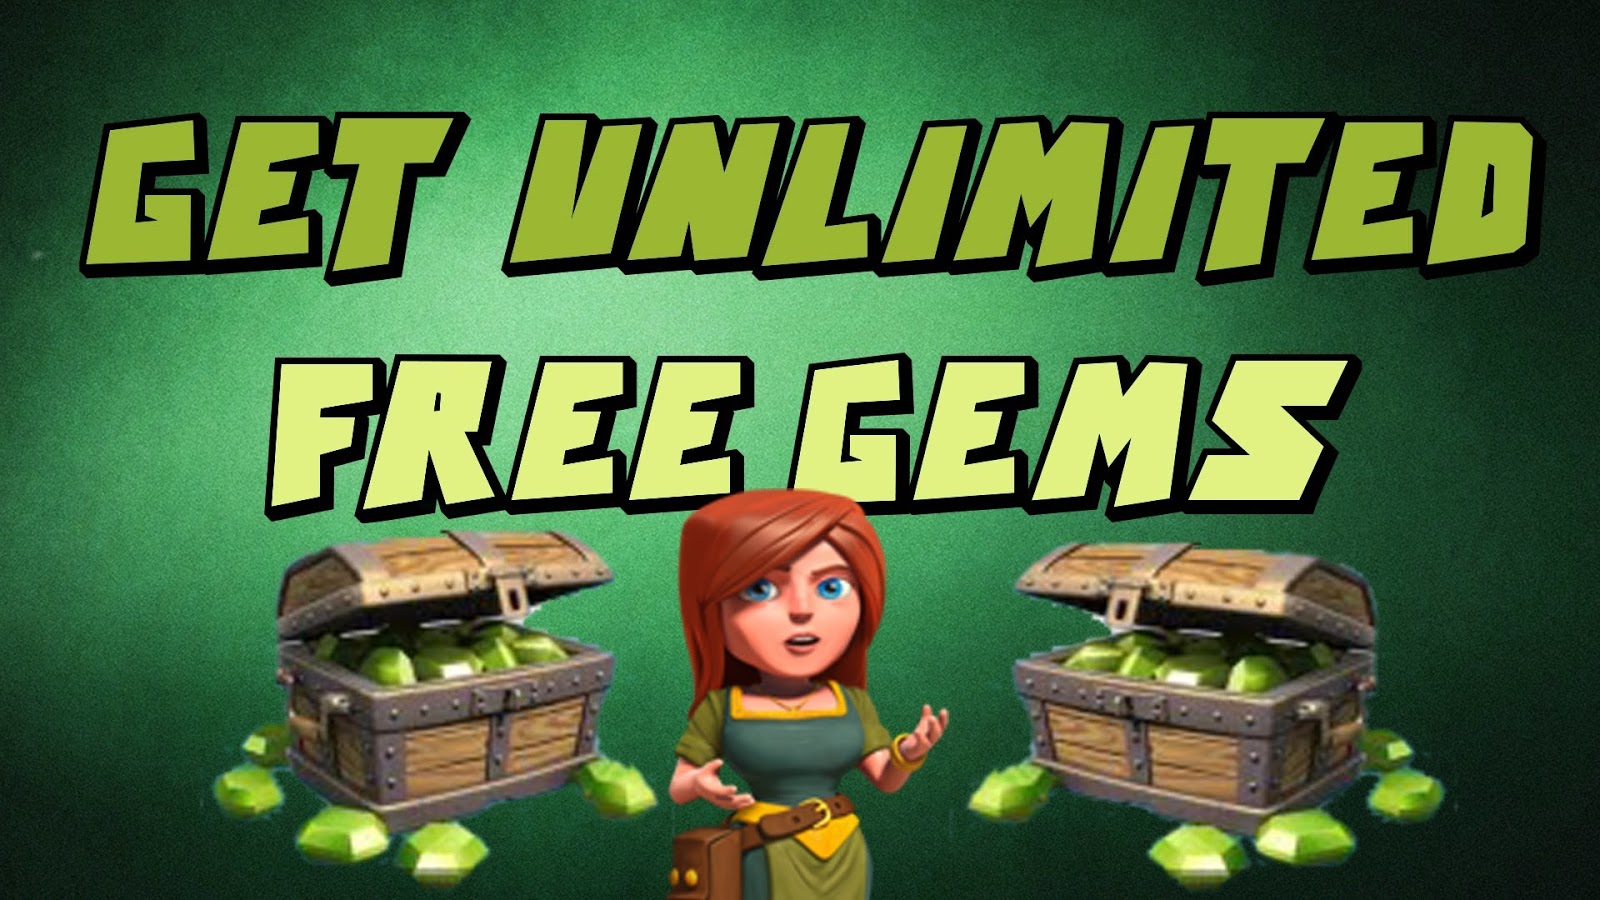 How To Get Free Gems In Clash Of Clans 2019|Clash Of Clans 